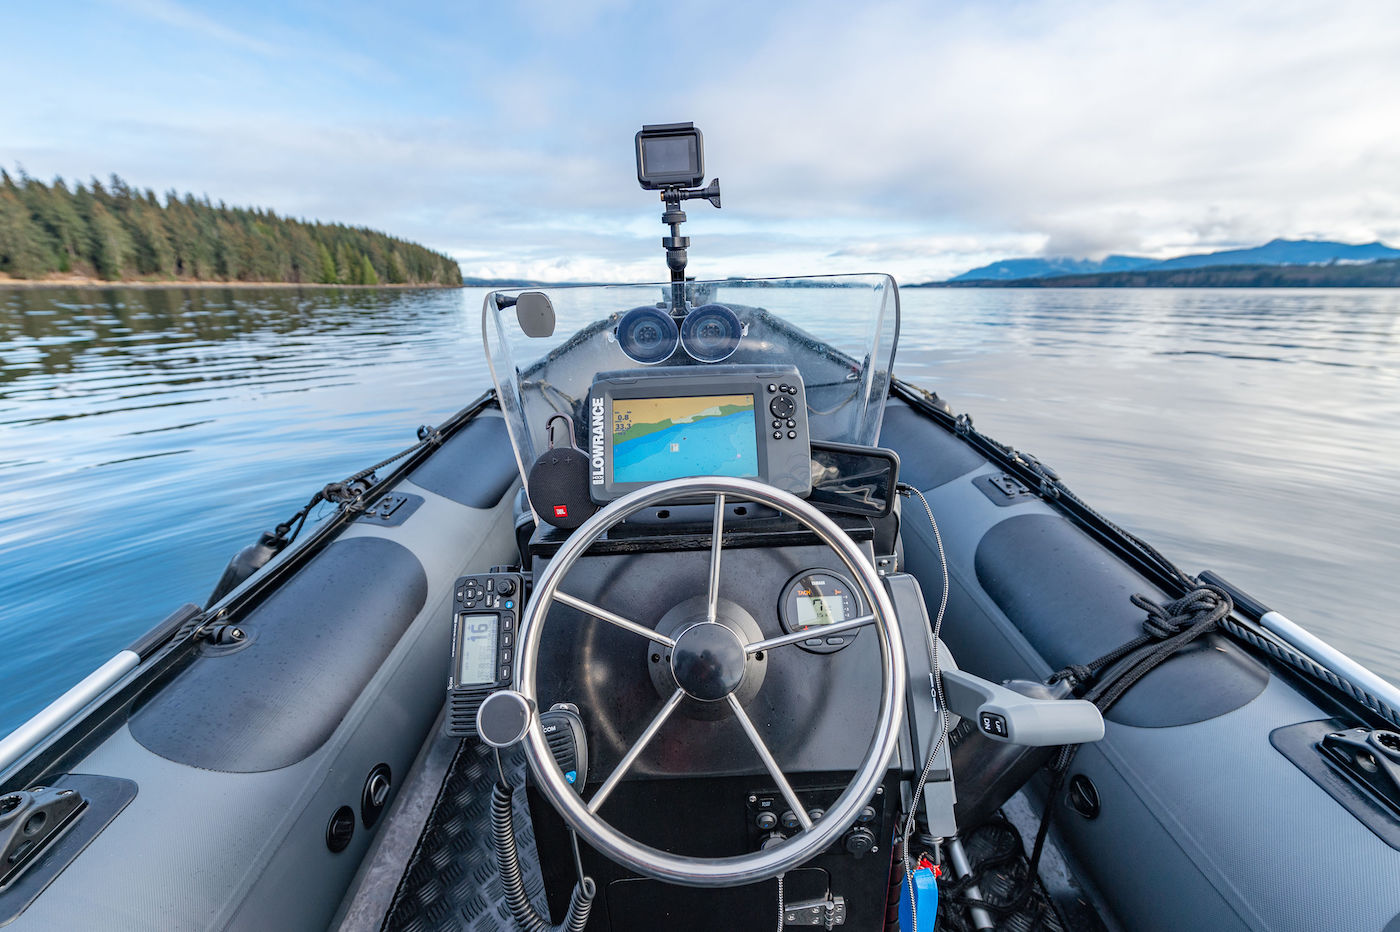 Boating Licenses Required to Operate an Inflatable Boat in Canada or the United States